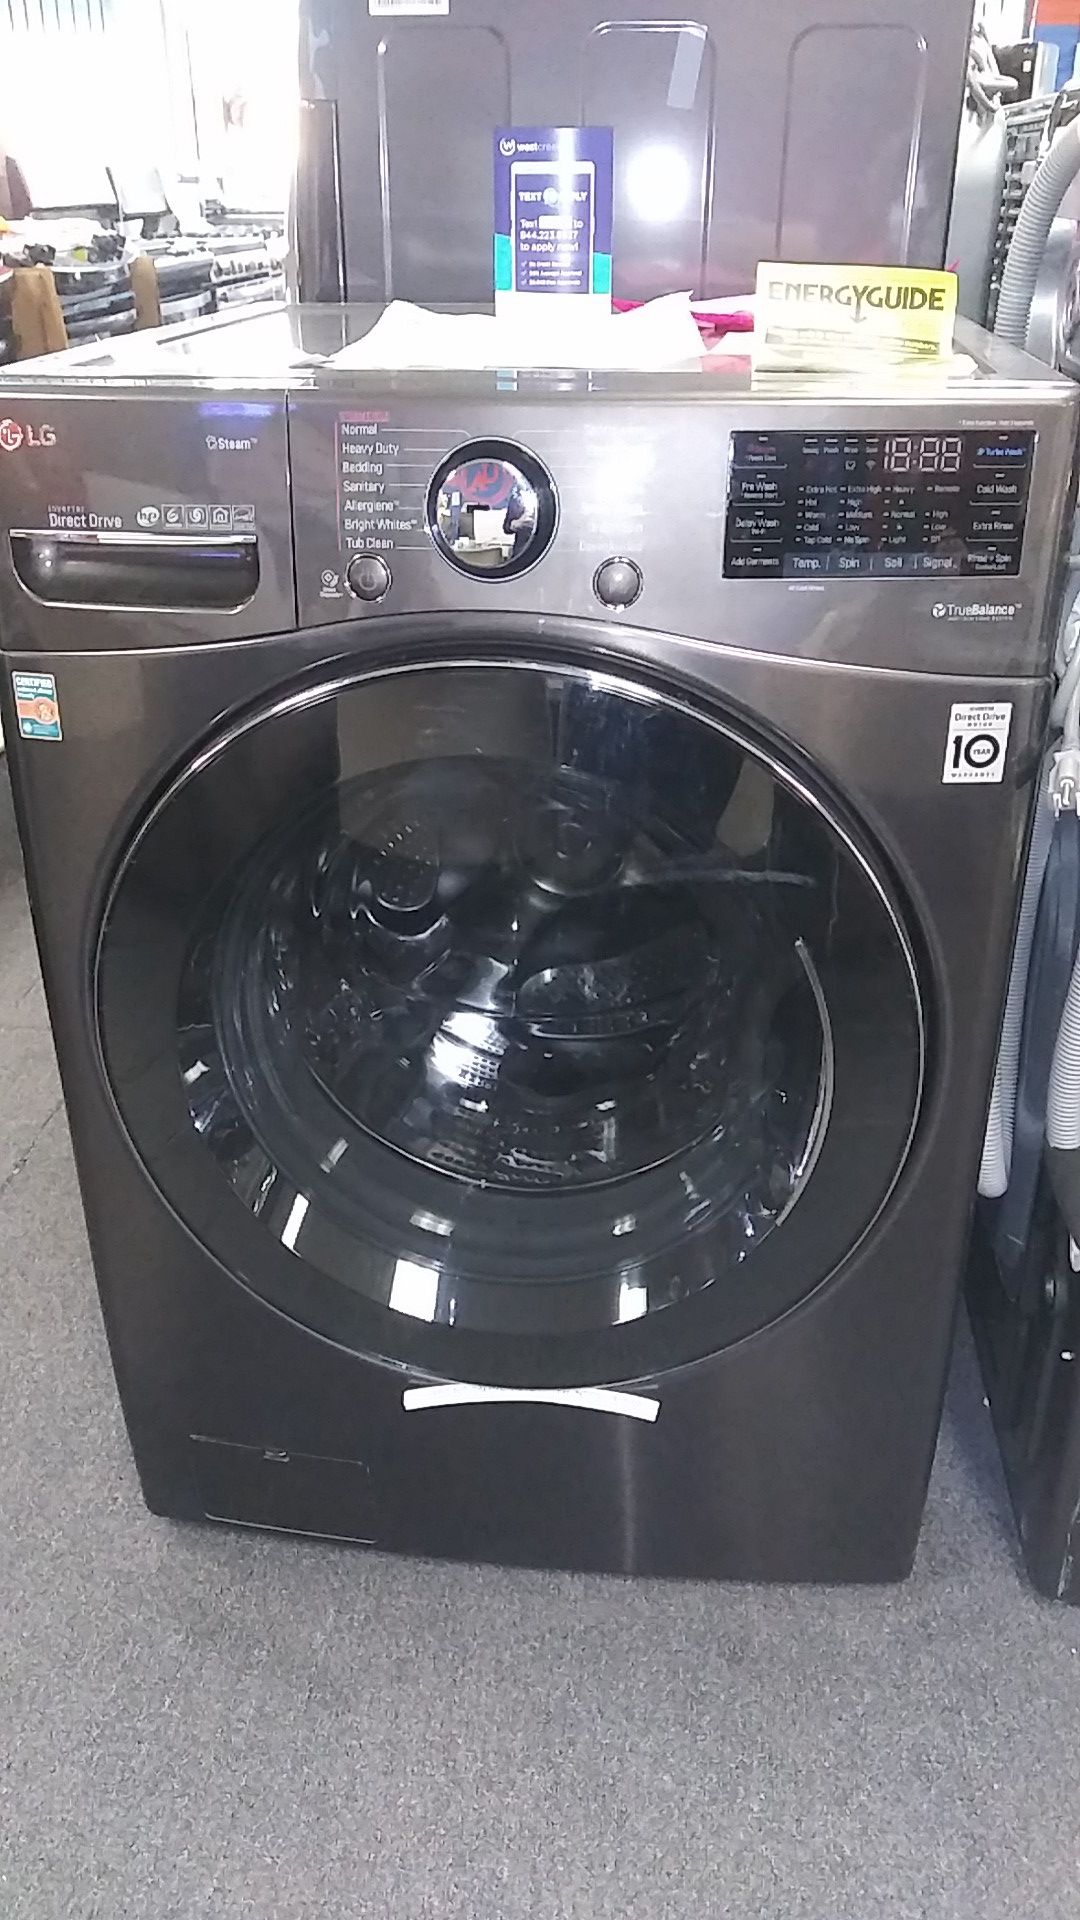 LG WASHER 🇺🇸10% OFF VETERANS DAY SPECIALS🇺🇸 ❗❗❗ONLY $40 DOWN⬇❗🤑 WE ARE OPEN😁❗